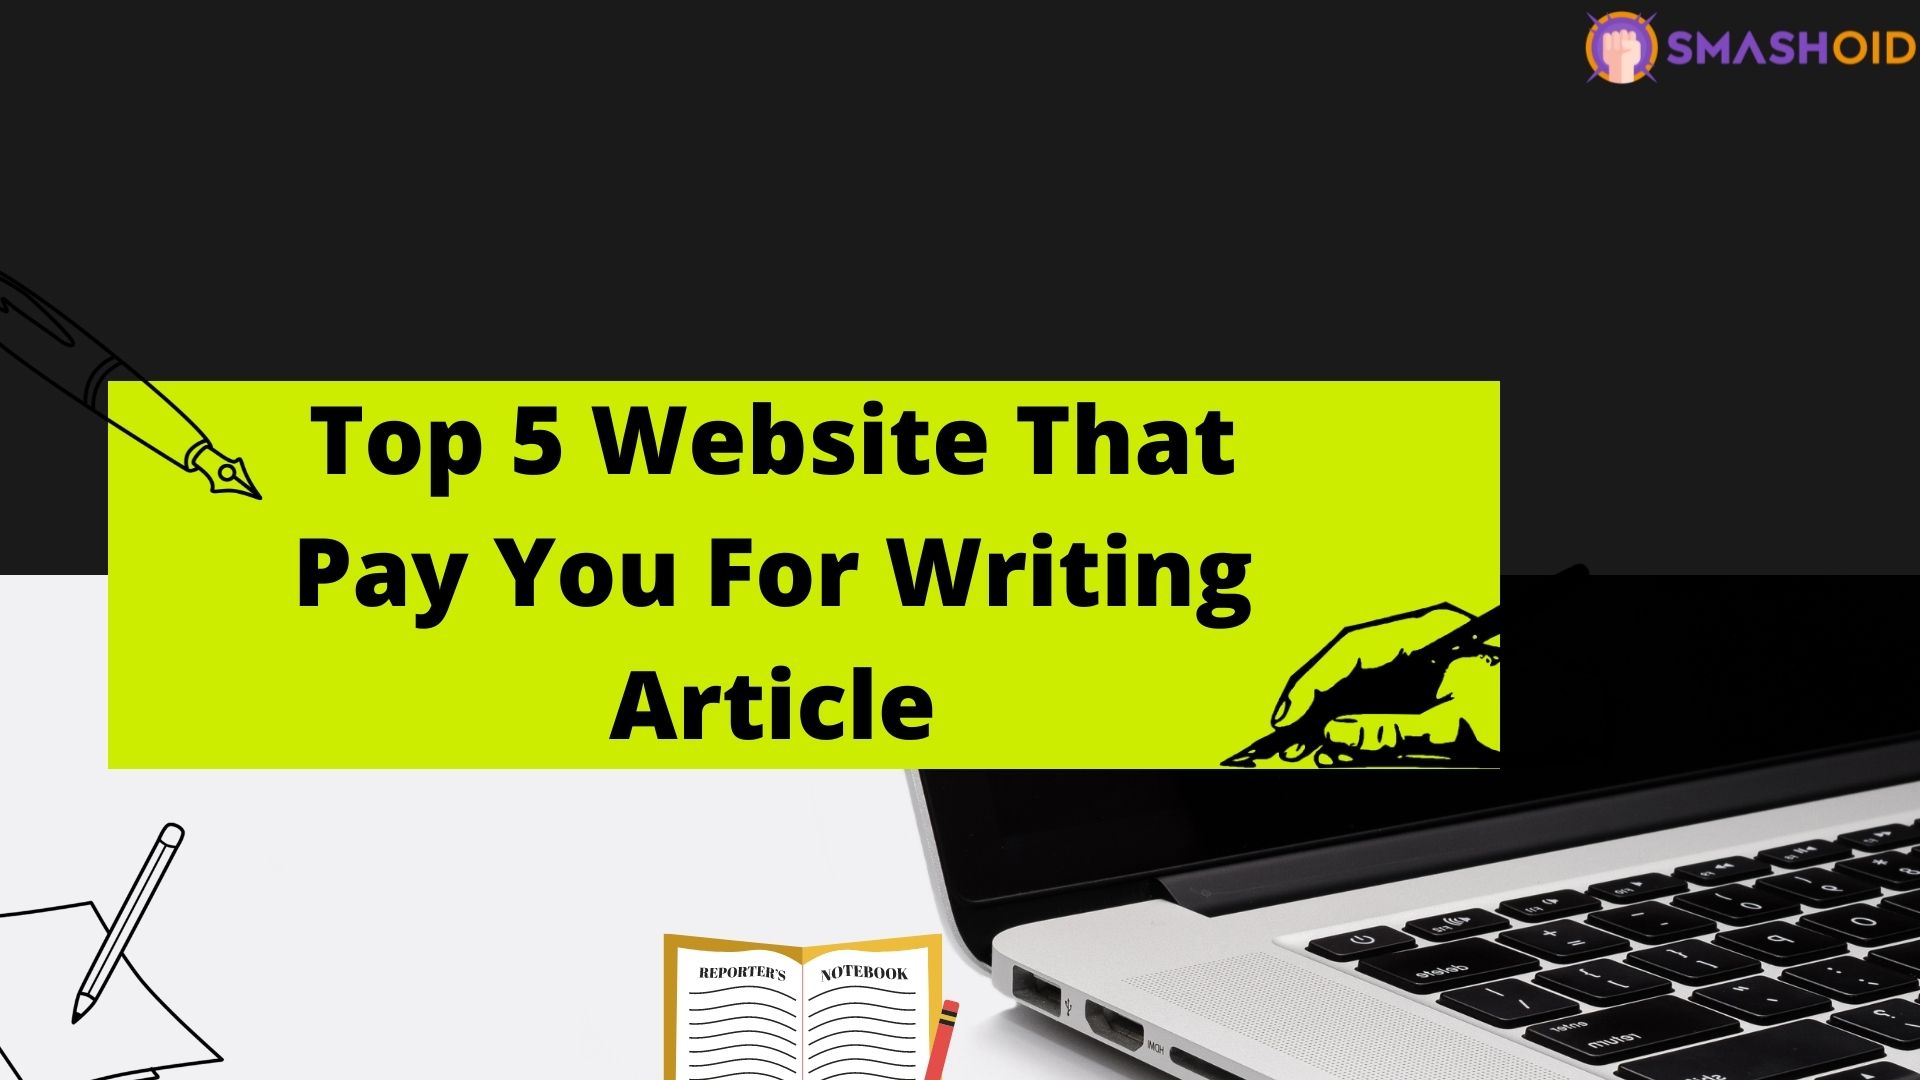 websites that pay for writing articles in india